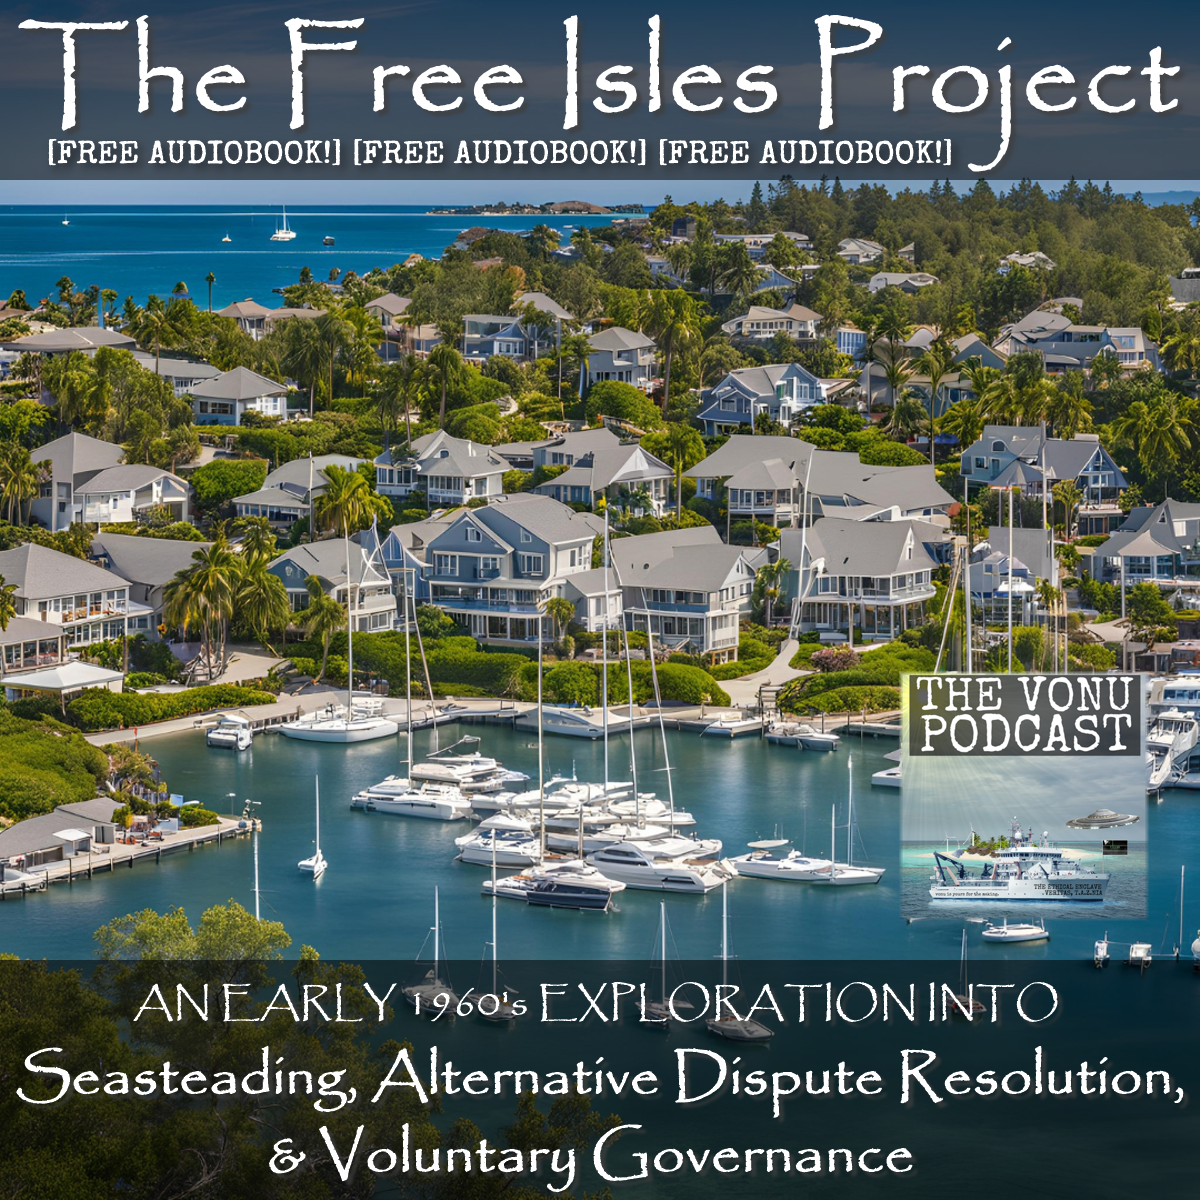 TVP #212: [The Free Isles Project] An Early 1960’s Exploration Into Seasteading, Alternative Dispute Resolution, & Voluntary Governance (#FREEAUDIOBOOK)